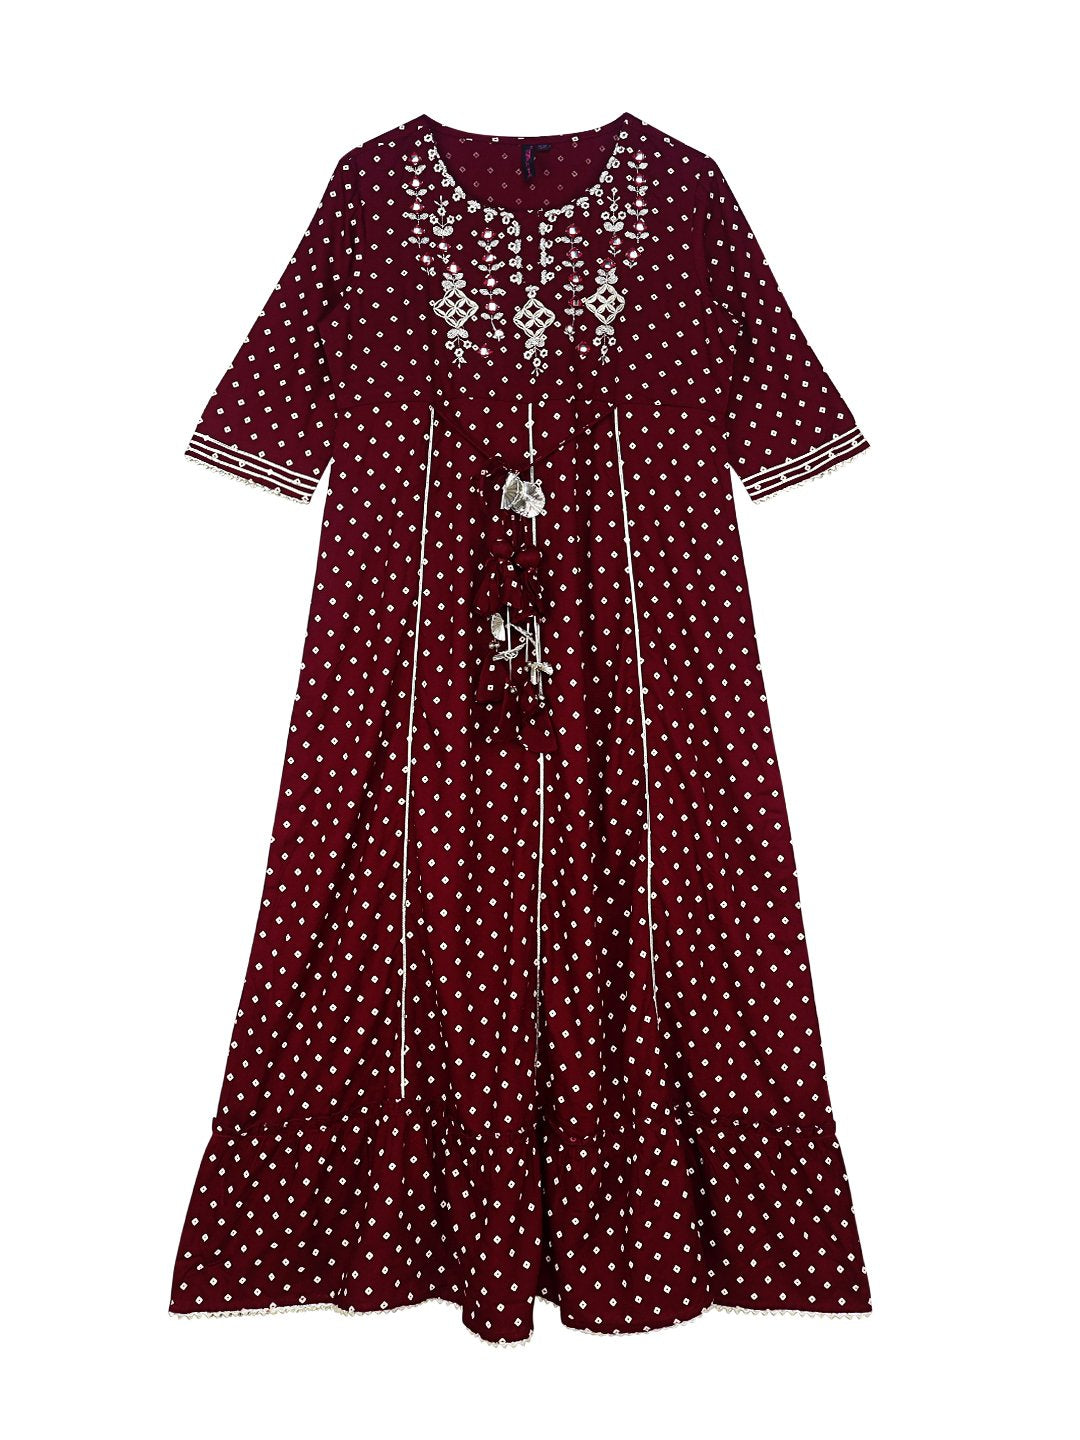 Ishin Girls Maroon Embroidered Fit & Flare Dress